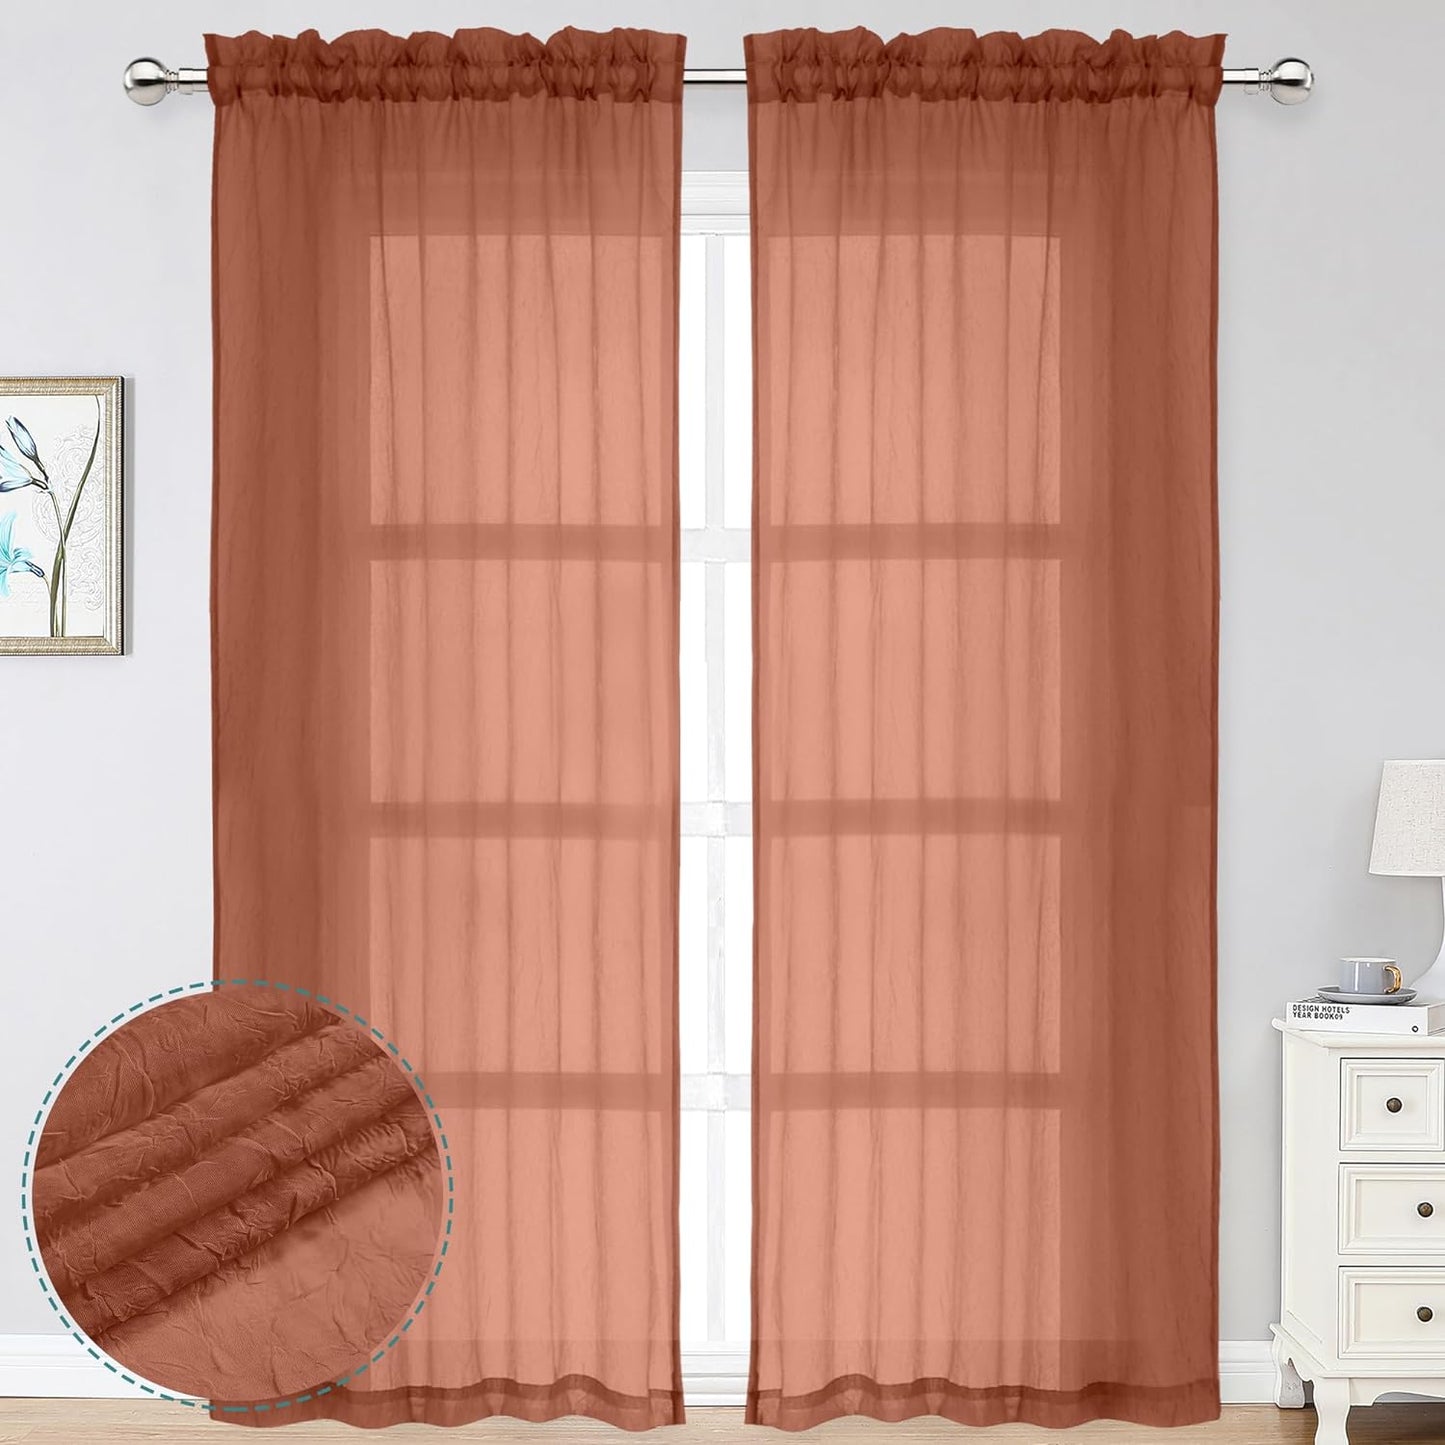 Chyhomenyc Crushed White Sheer Valances for Window 14 Inch Length 2 PCS, Crinkle Voile Short Kitchen Curtains with Dual Rod Pockets，Gauzy Bedroom Curtain Valance，Each 42Wx14L Inches  Chyhomenyc Rust 40 W X 96 L 